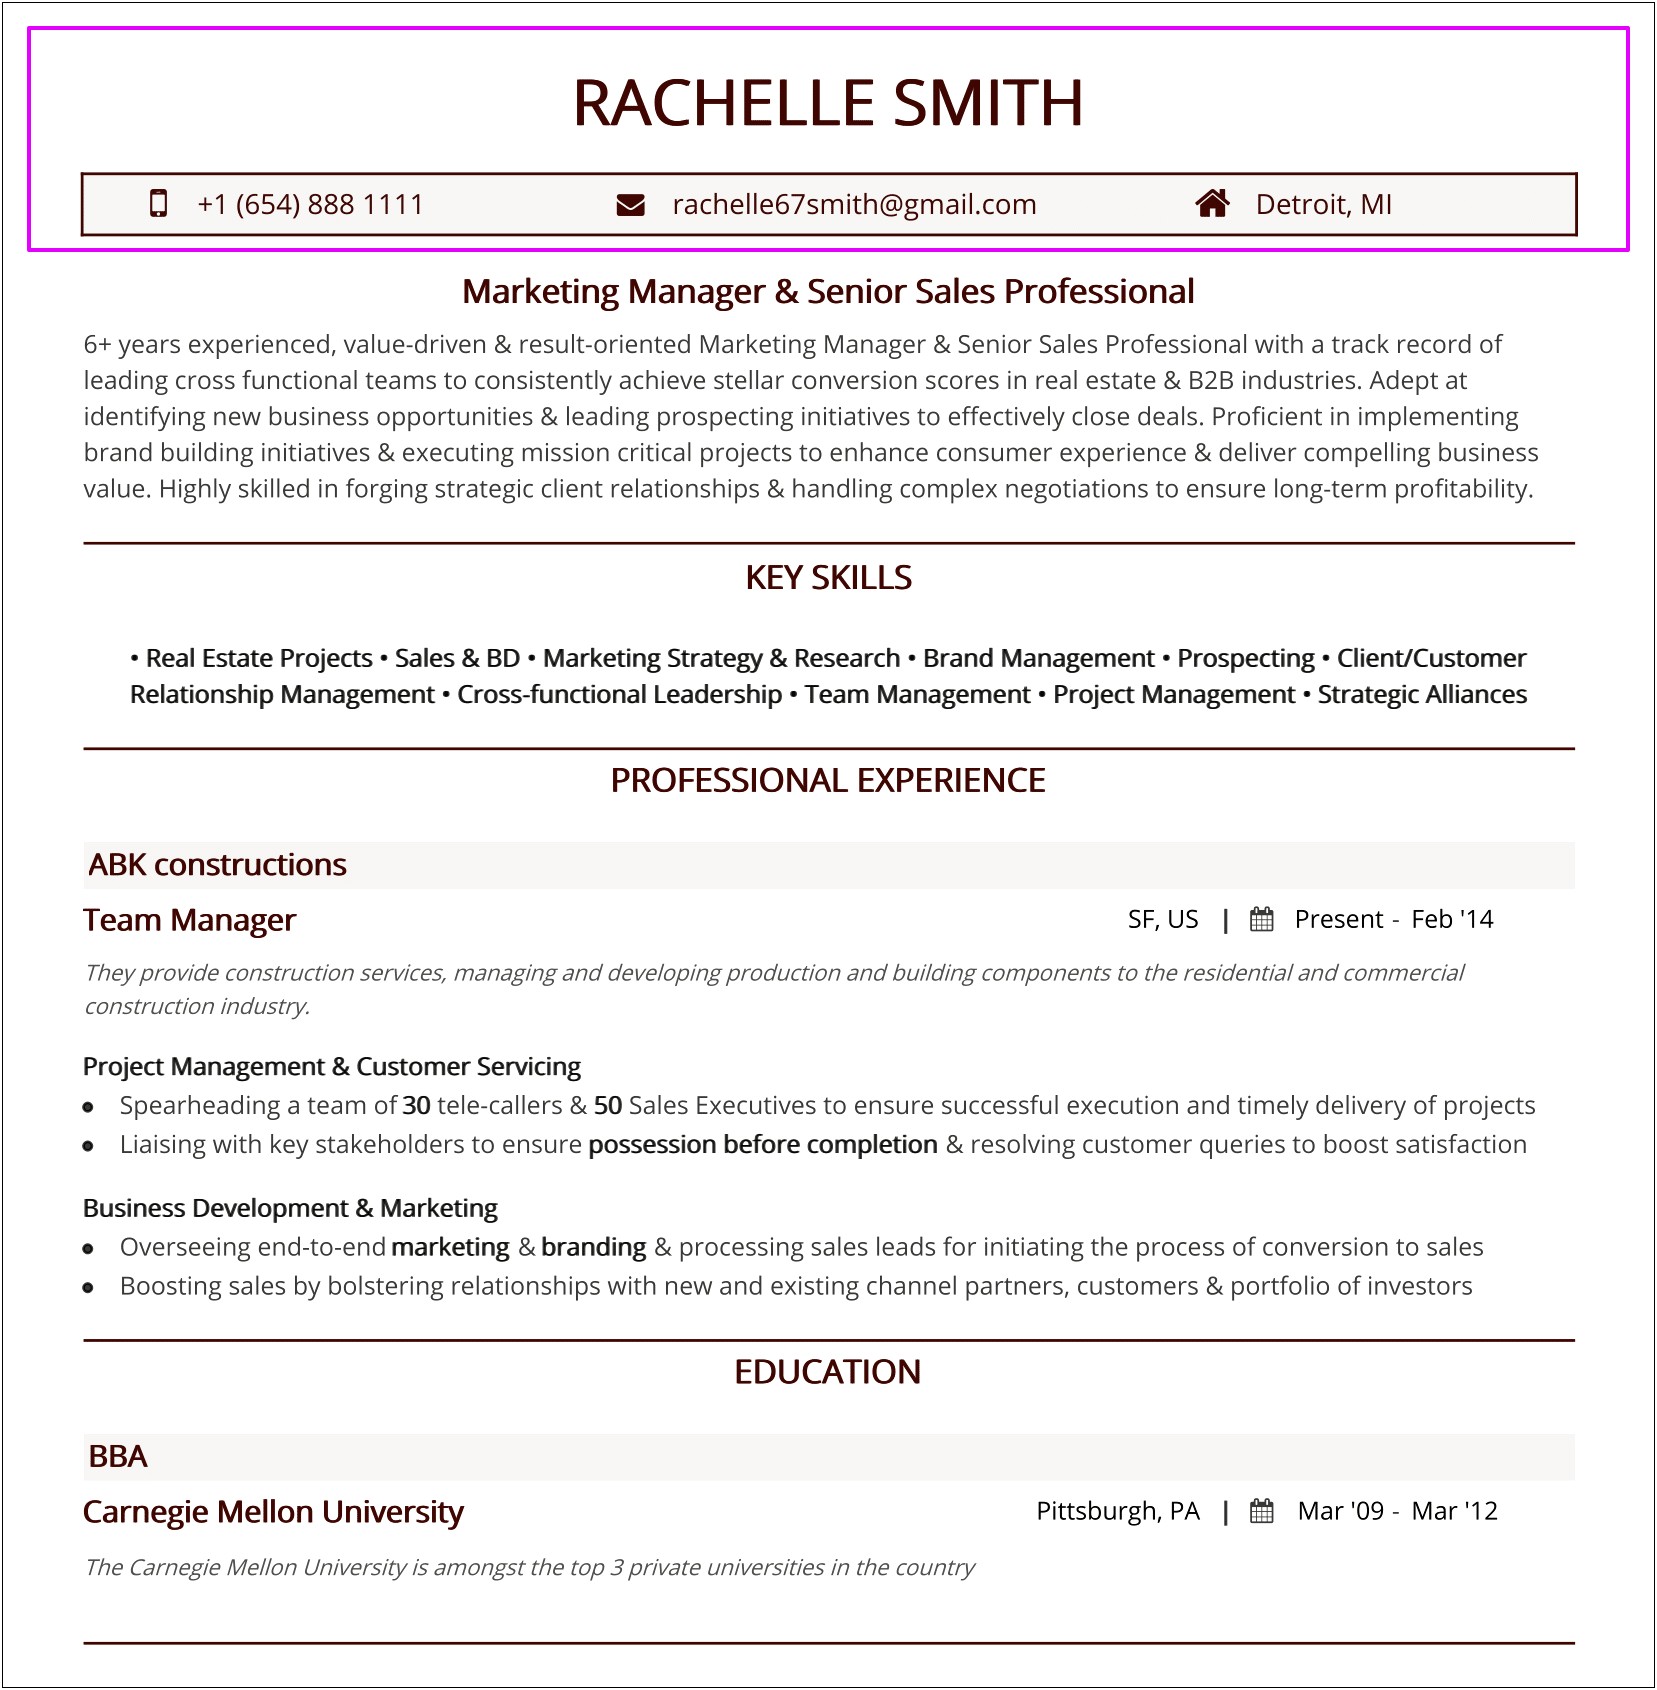 Putting Names In Body Of Resume